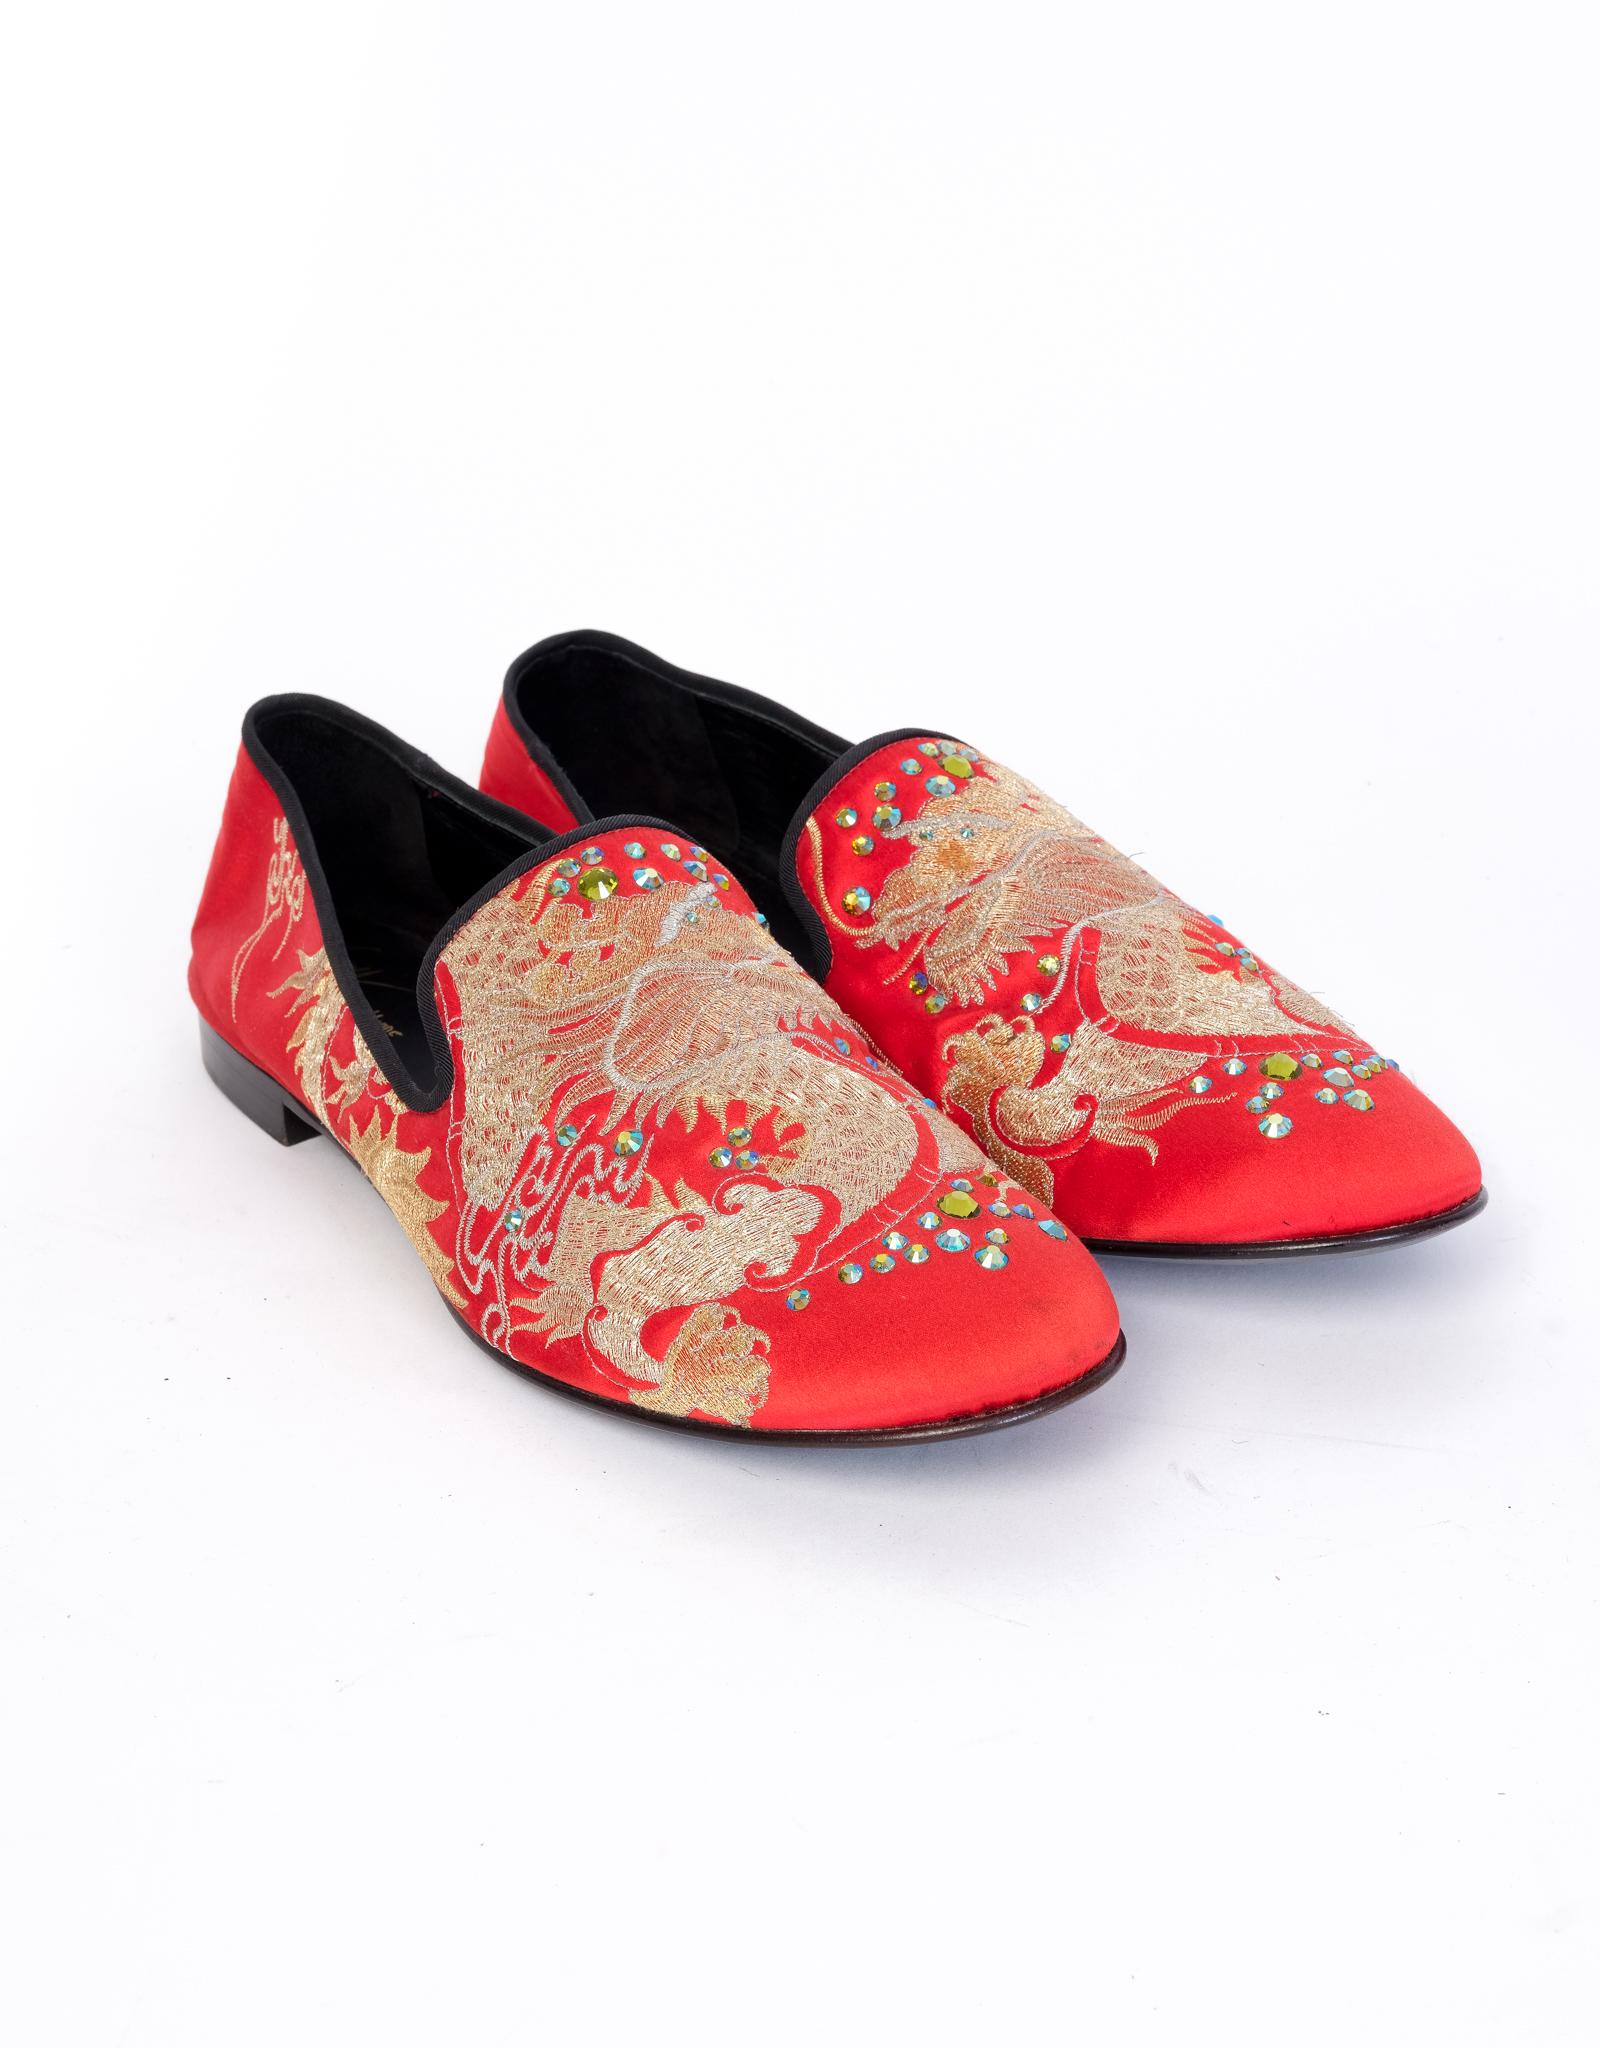 Featuring an intricately embroidered dragon exterior, a black interior, and black soles.

COLOR: Red
MATERIAL: Silk
SIZE: 45 EU / 12 US MENS
COMES WITH: Dust bag

Made in Italy